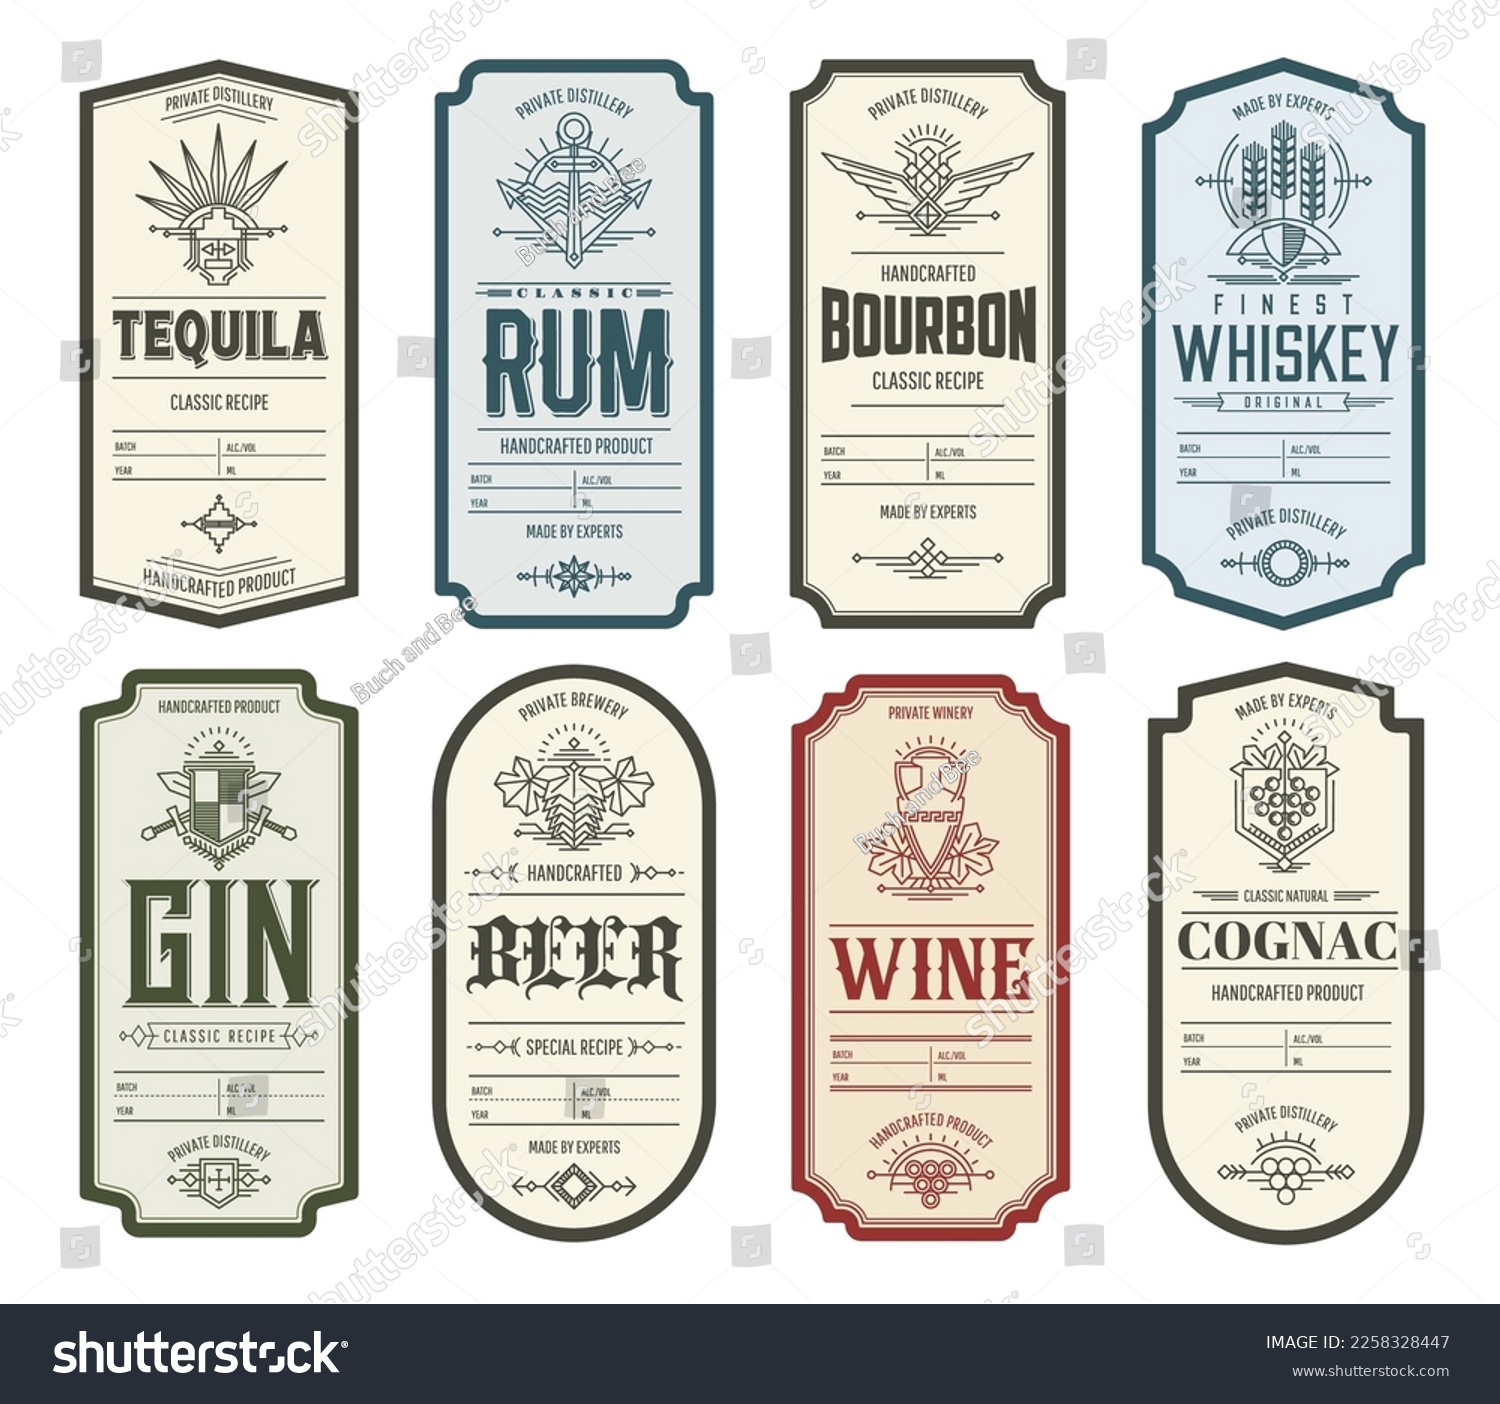 Vintage alcohol labels. Tequila, whiskey and rum - Royalty Free Stock ...